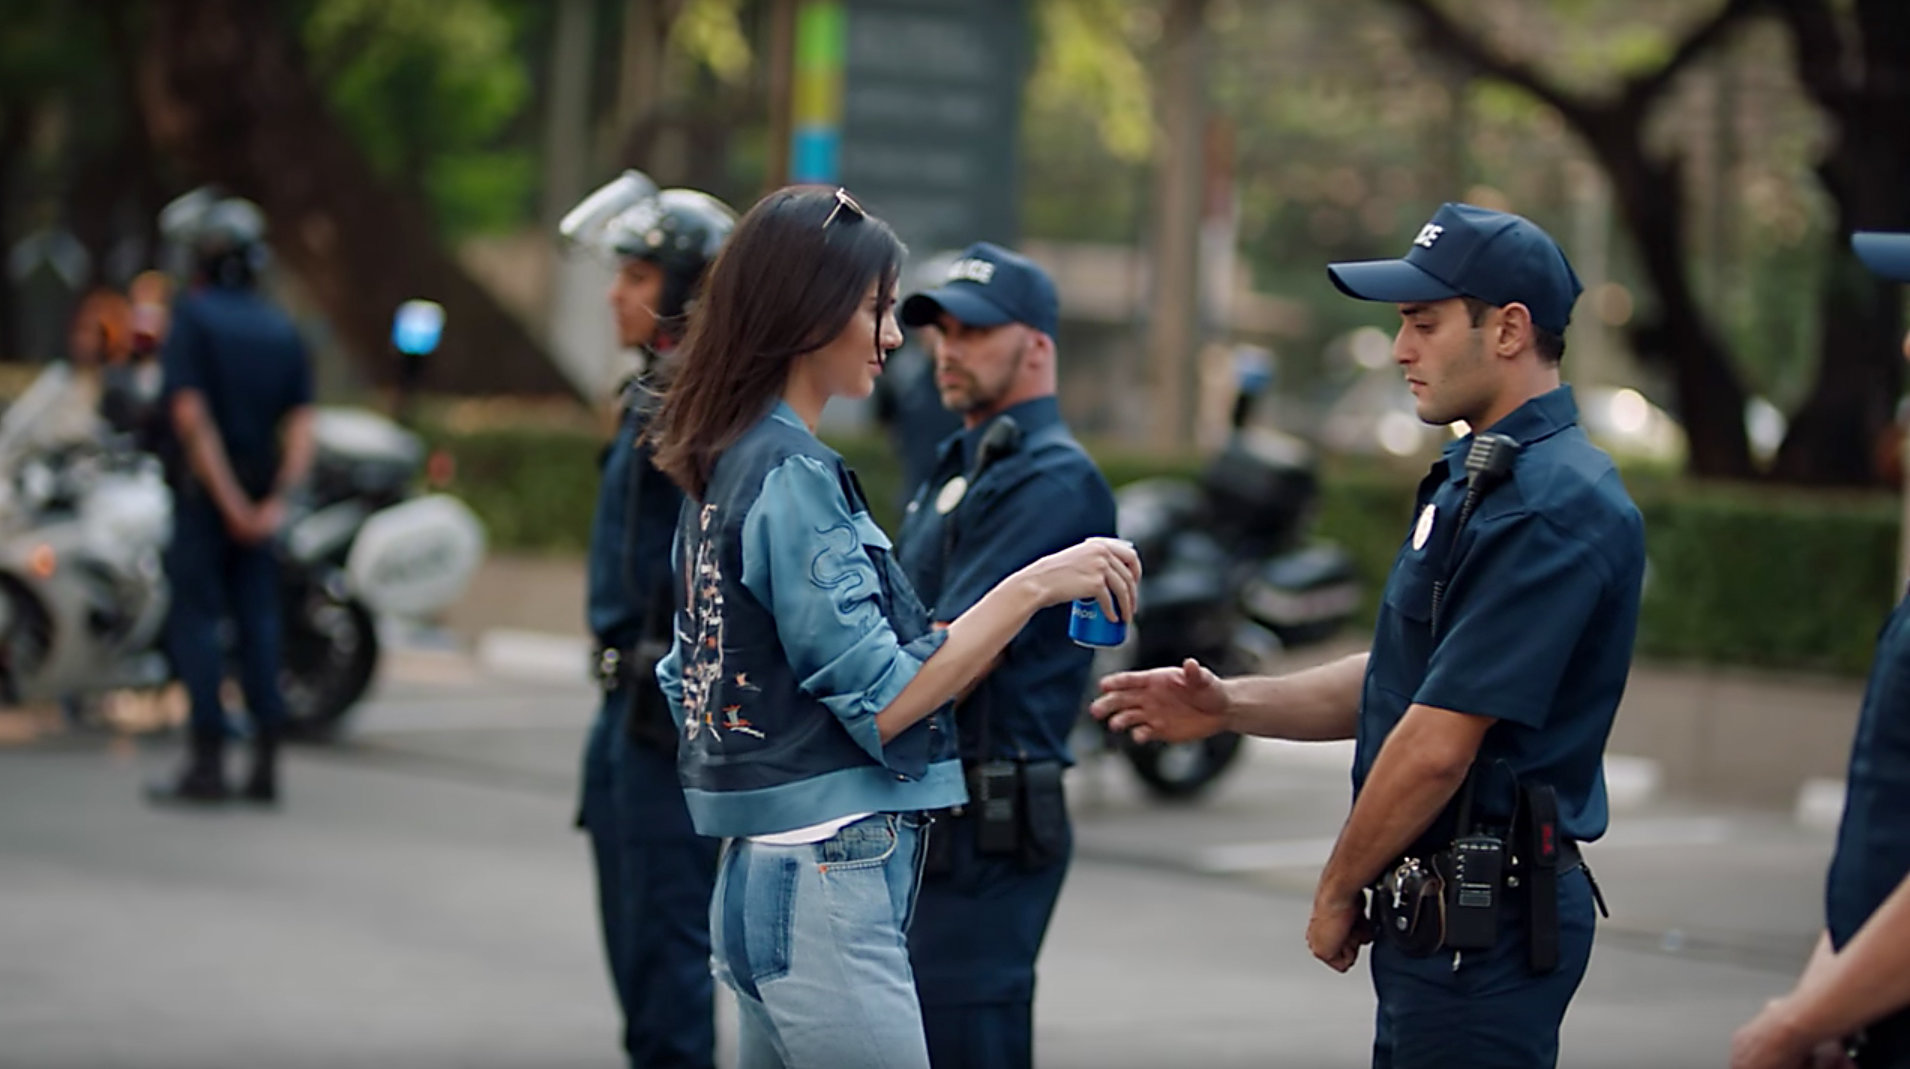 Social Media Influencer Kylie Jenner In Pepsi's 'Live For Now' Ad Campaign